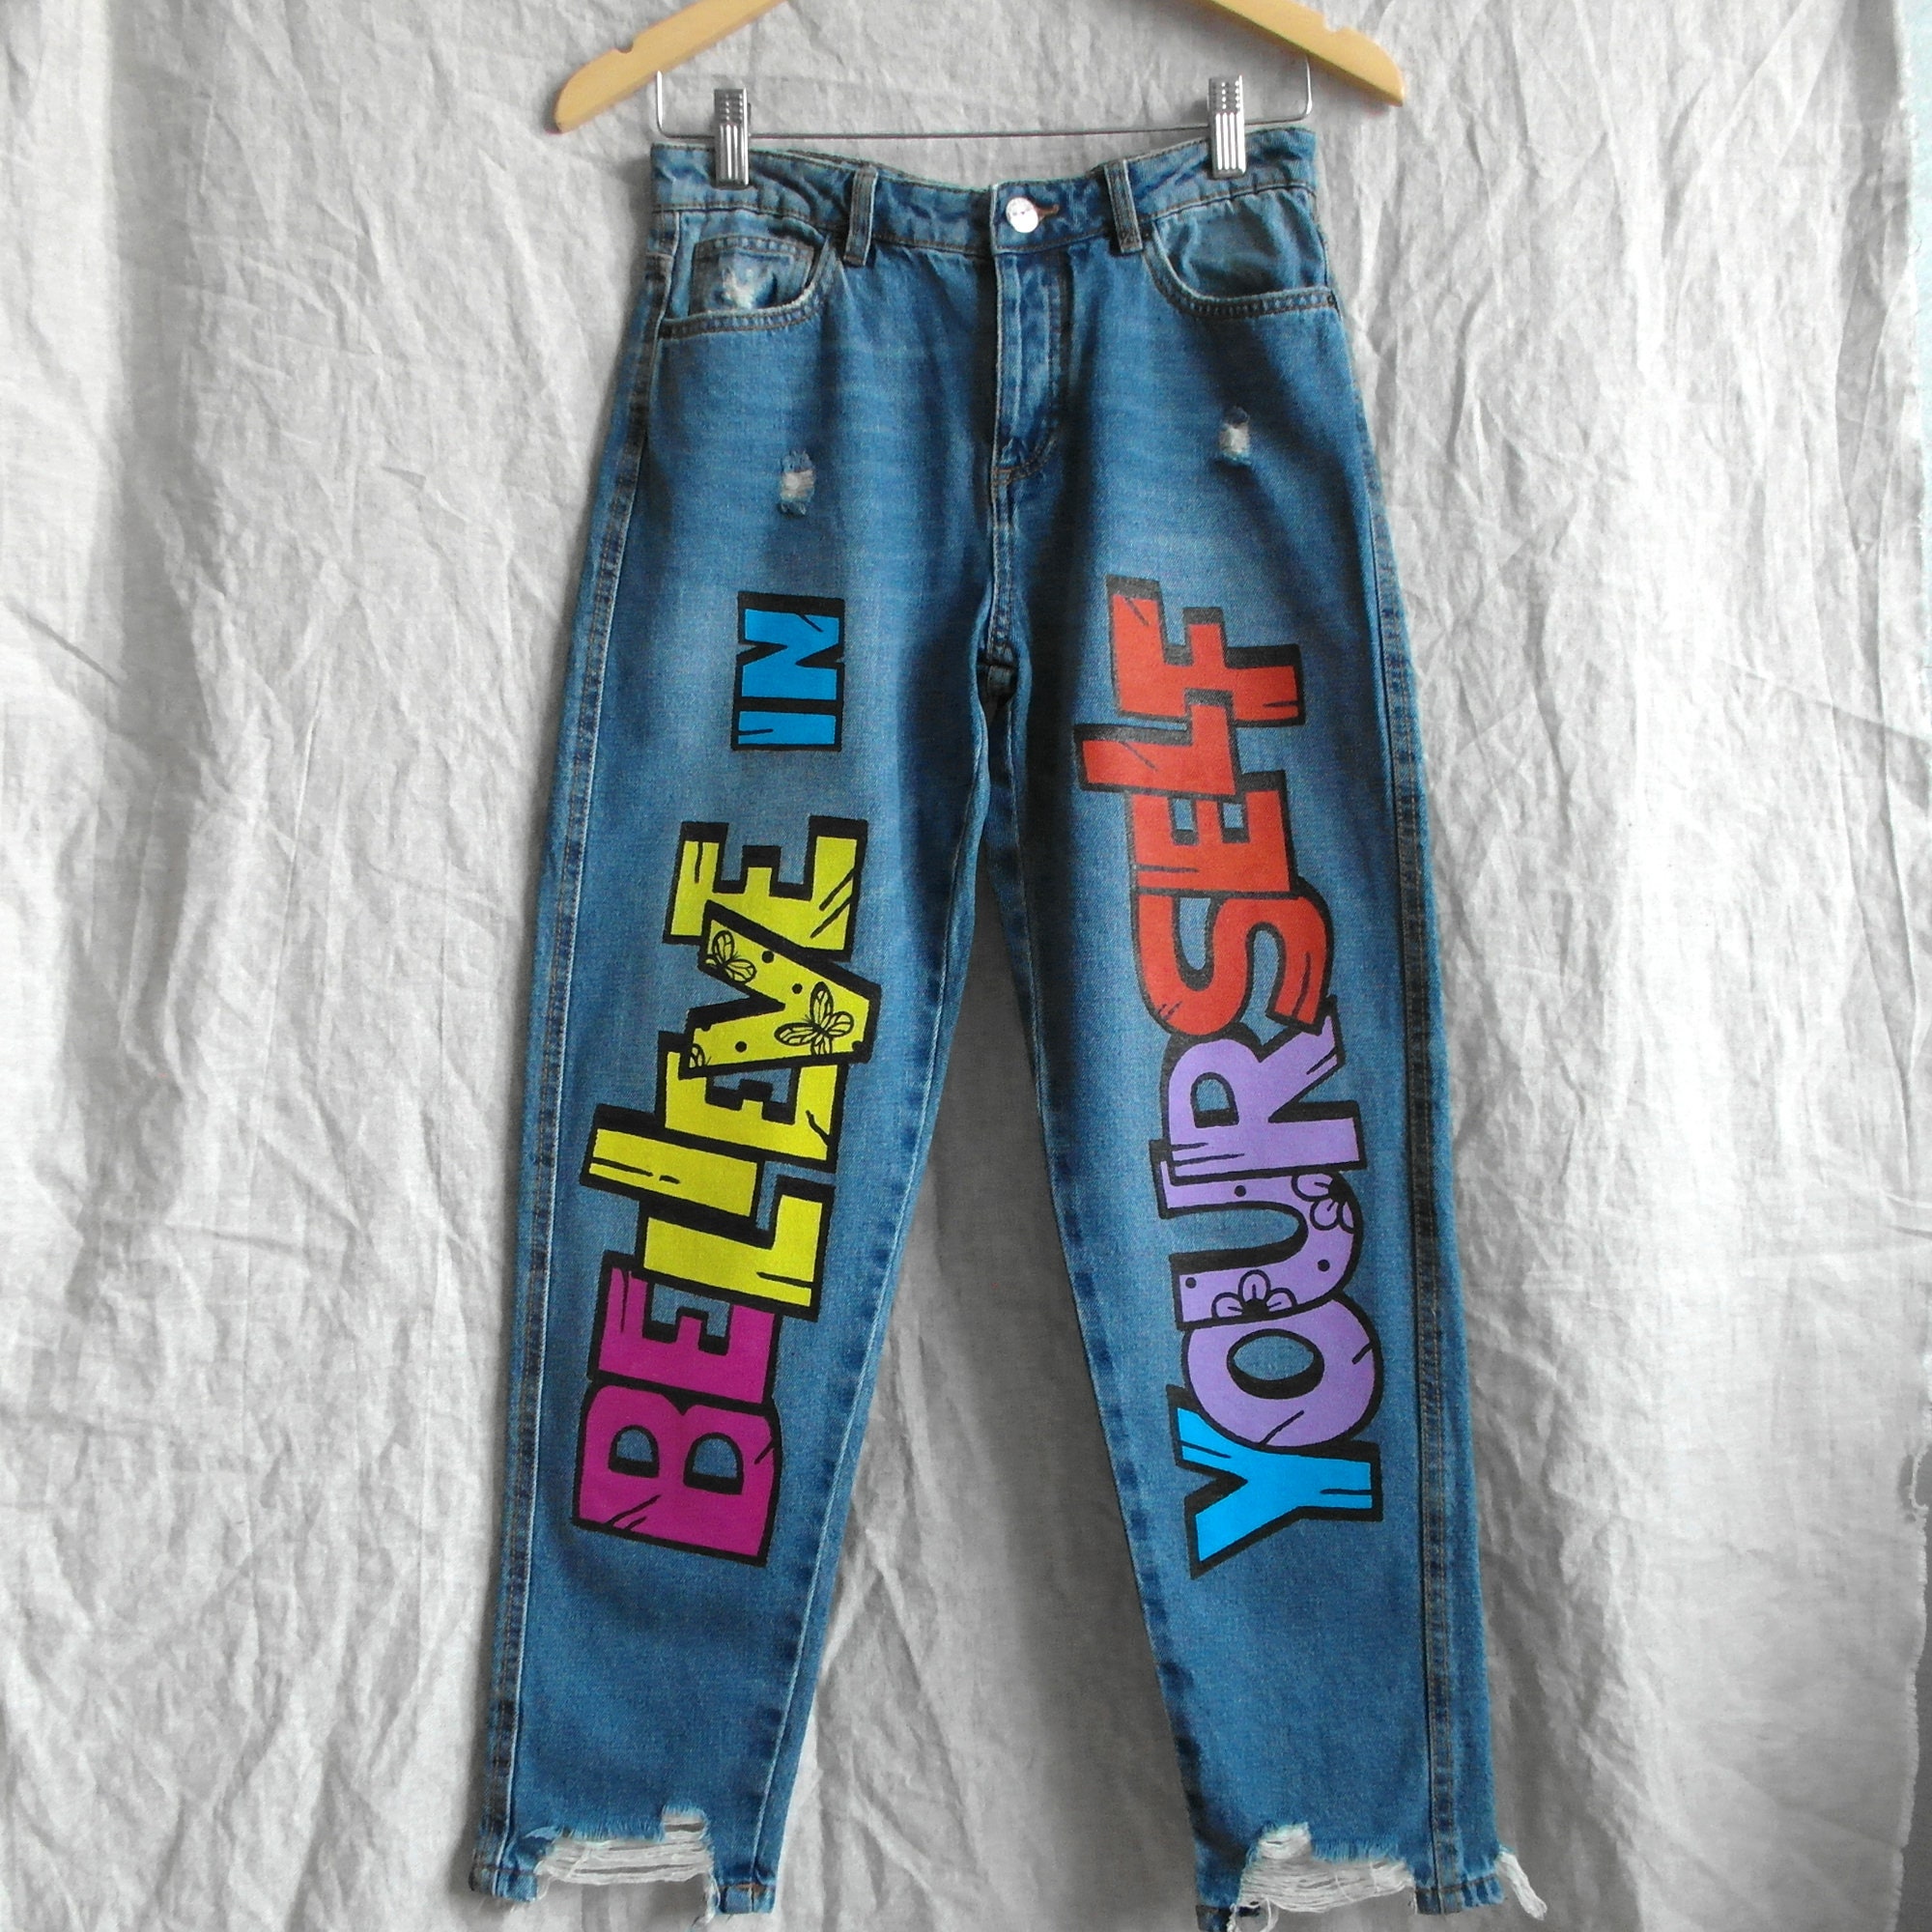 Handpainted jeans with custom text on request | Etsy